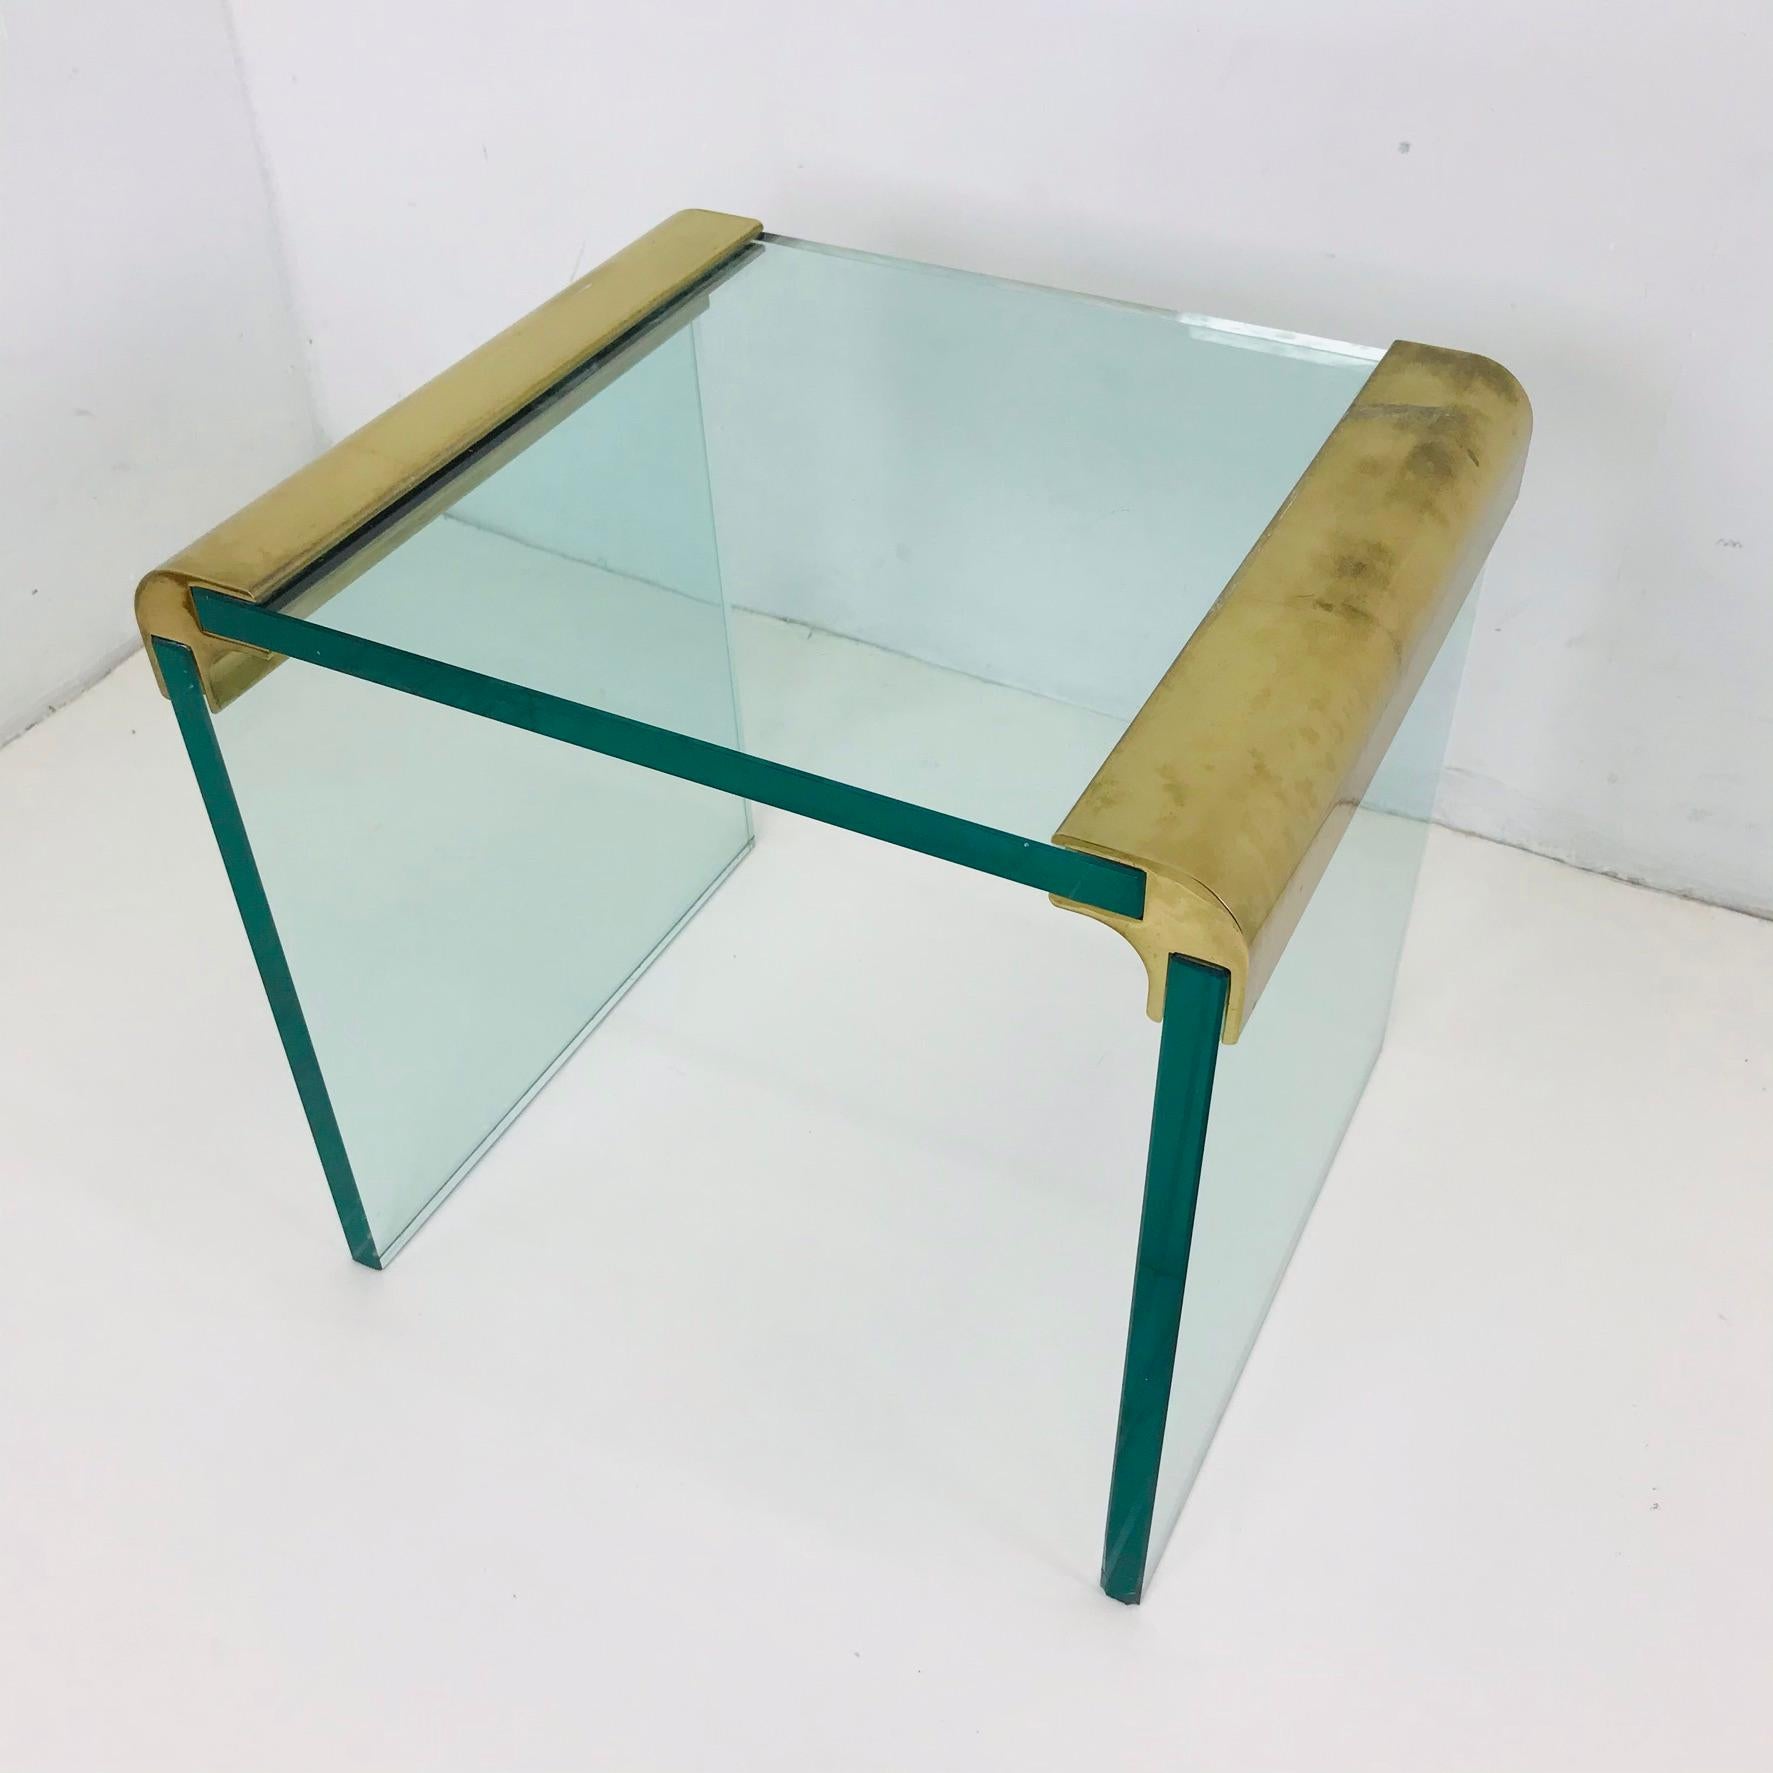 This beautiful brass and glass waterfall side table is from the Pace Collection by Leon Rosen. It is a vintage piece from the 1970s that reflects the Minimalist design aesthetic that emerged from Mid-Century Modern styles. Highly functional without